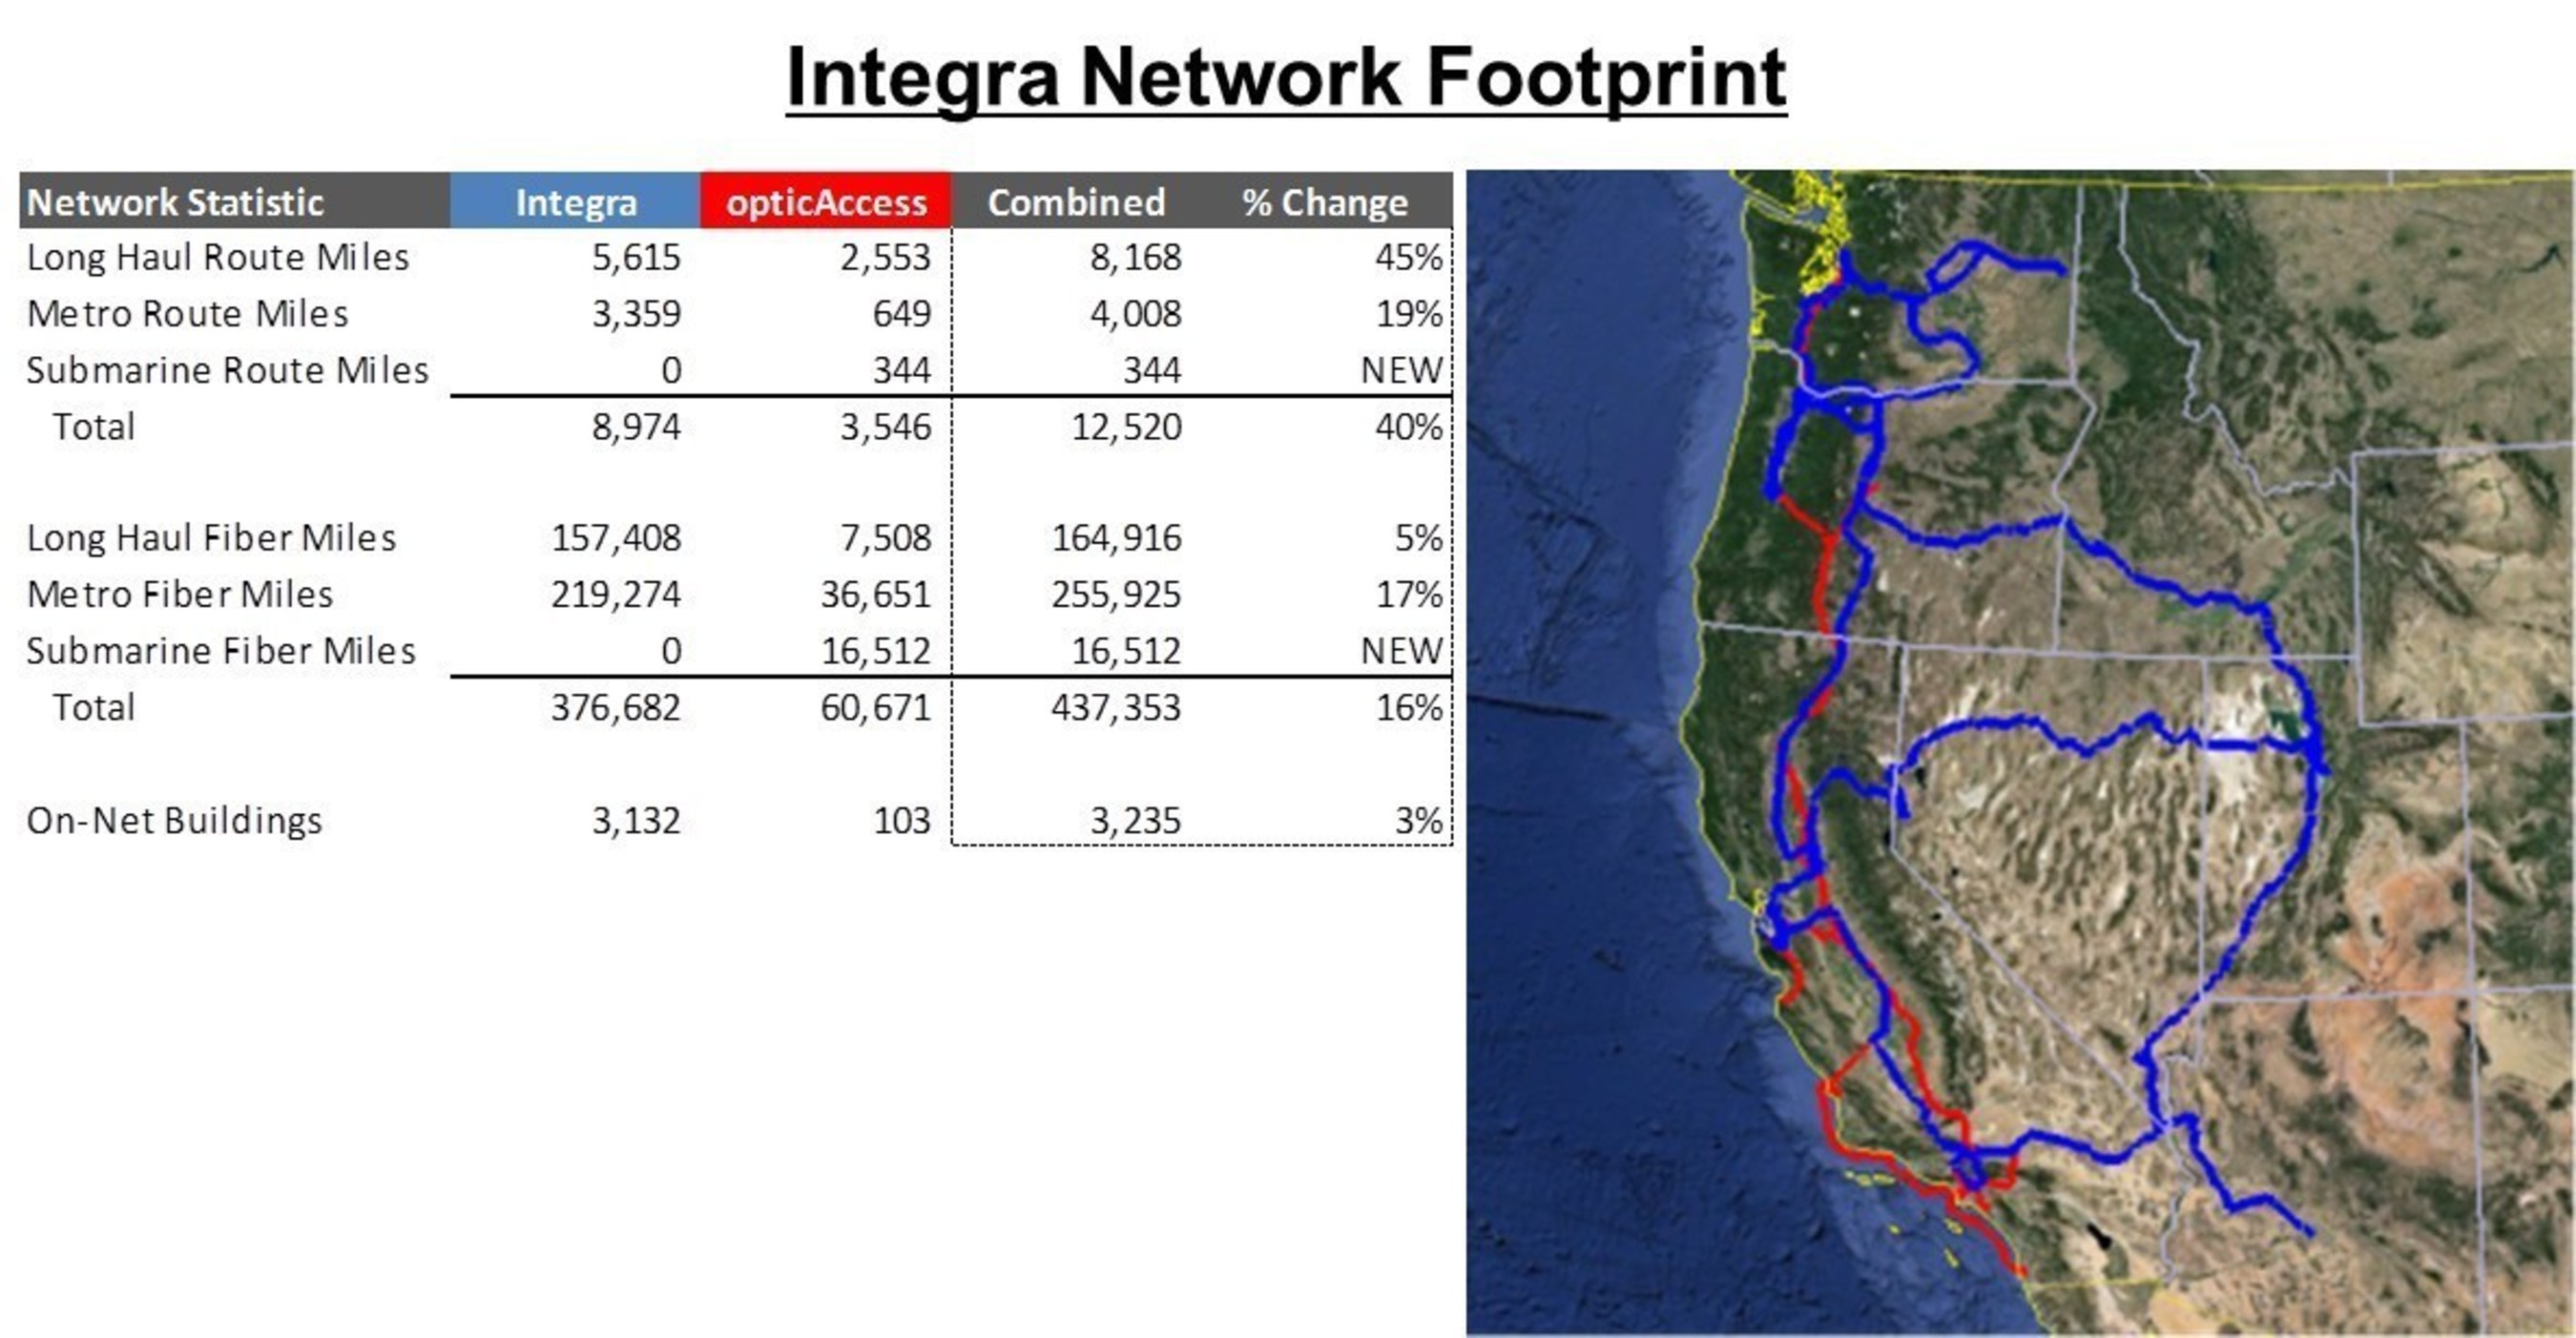 Integra's network footprint through the acquisition of opticAccess.